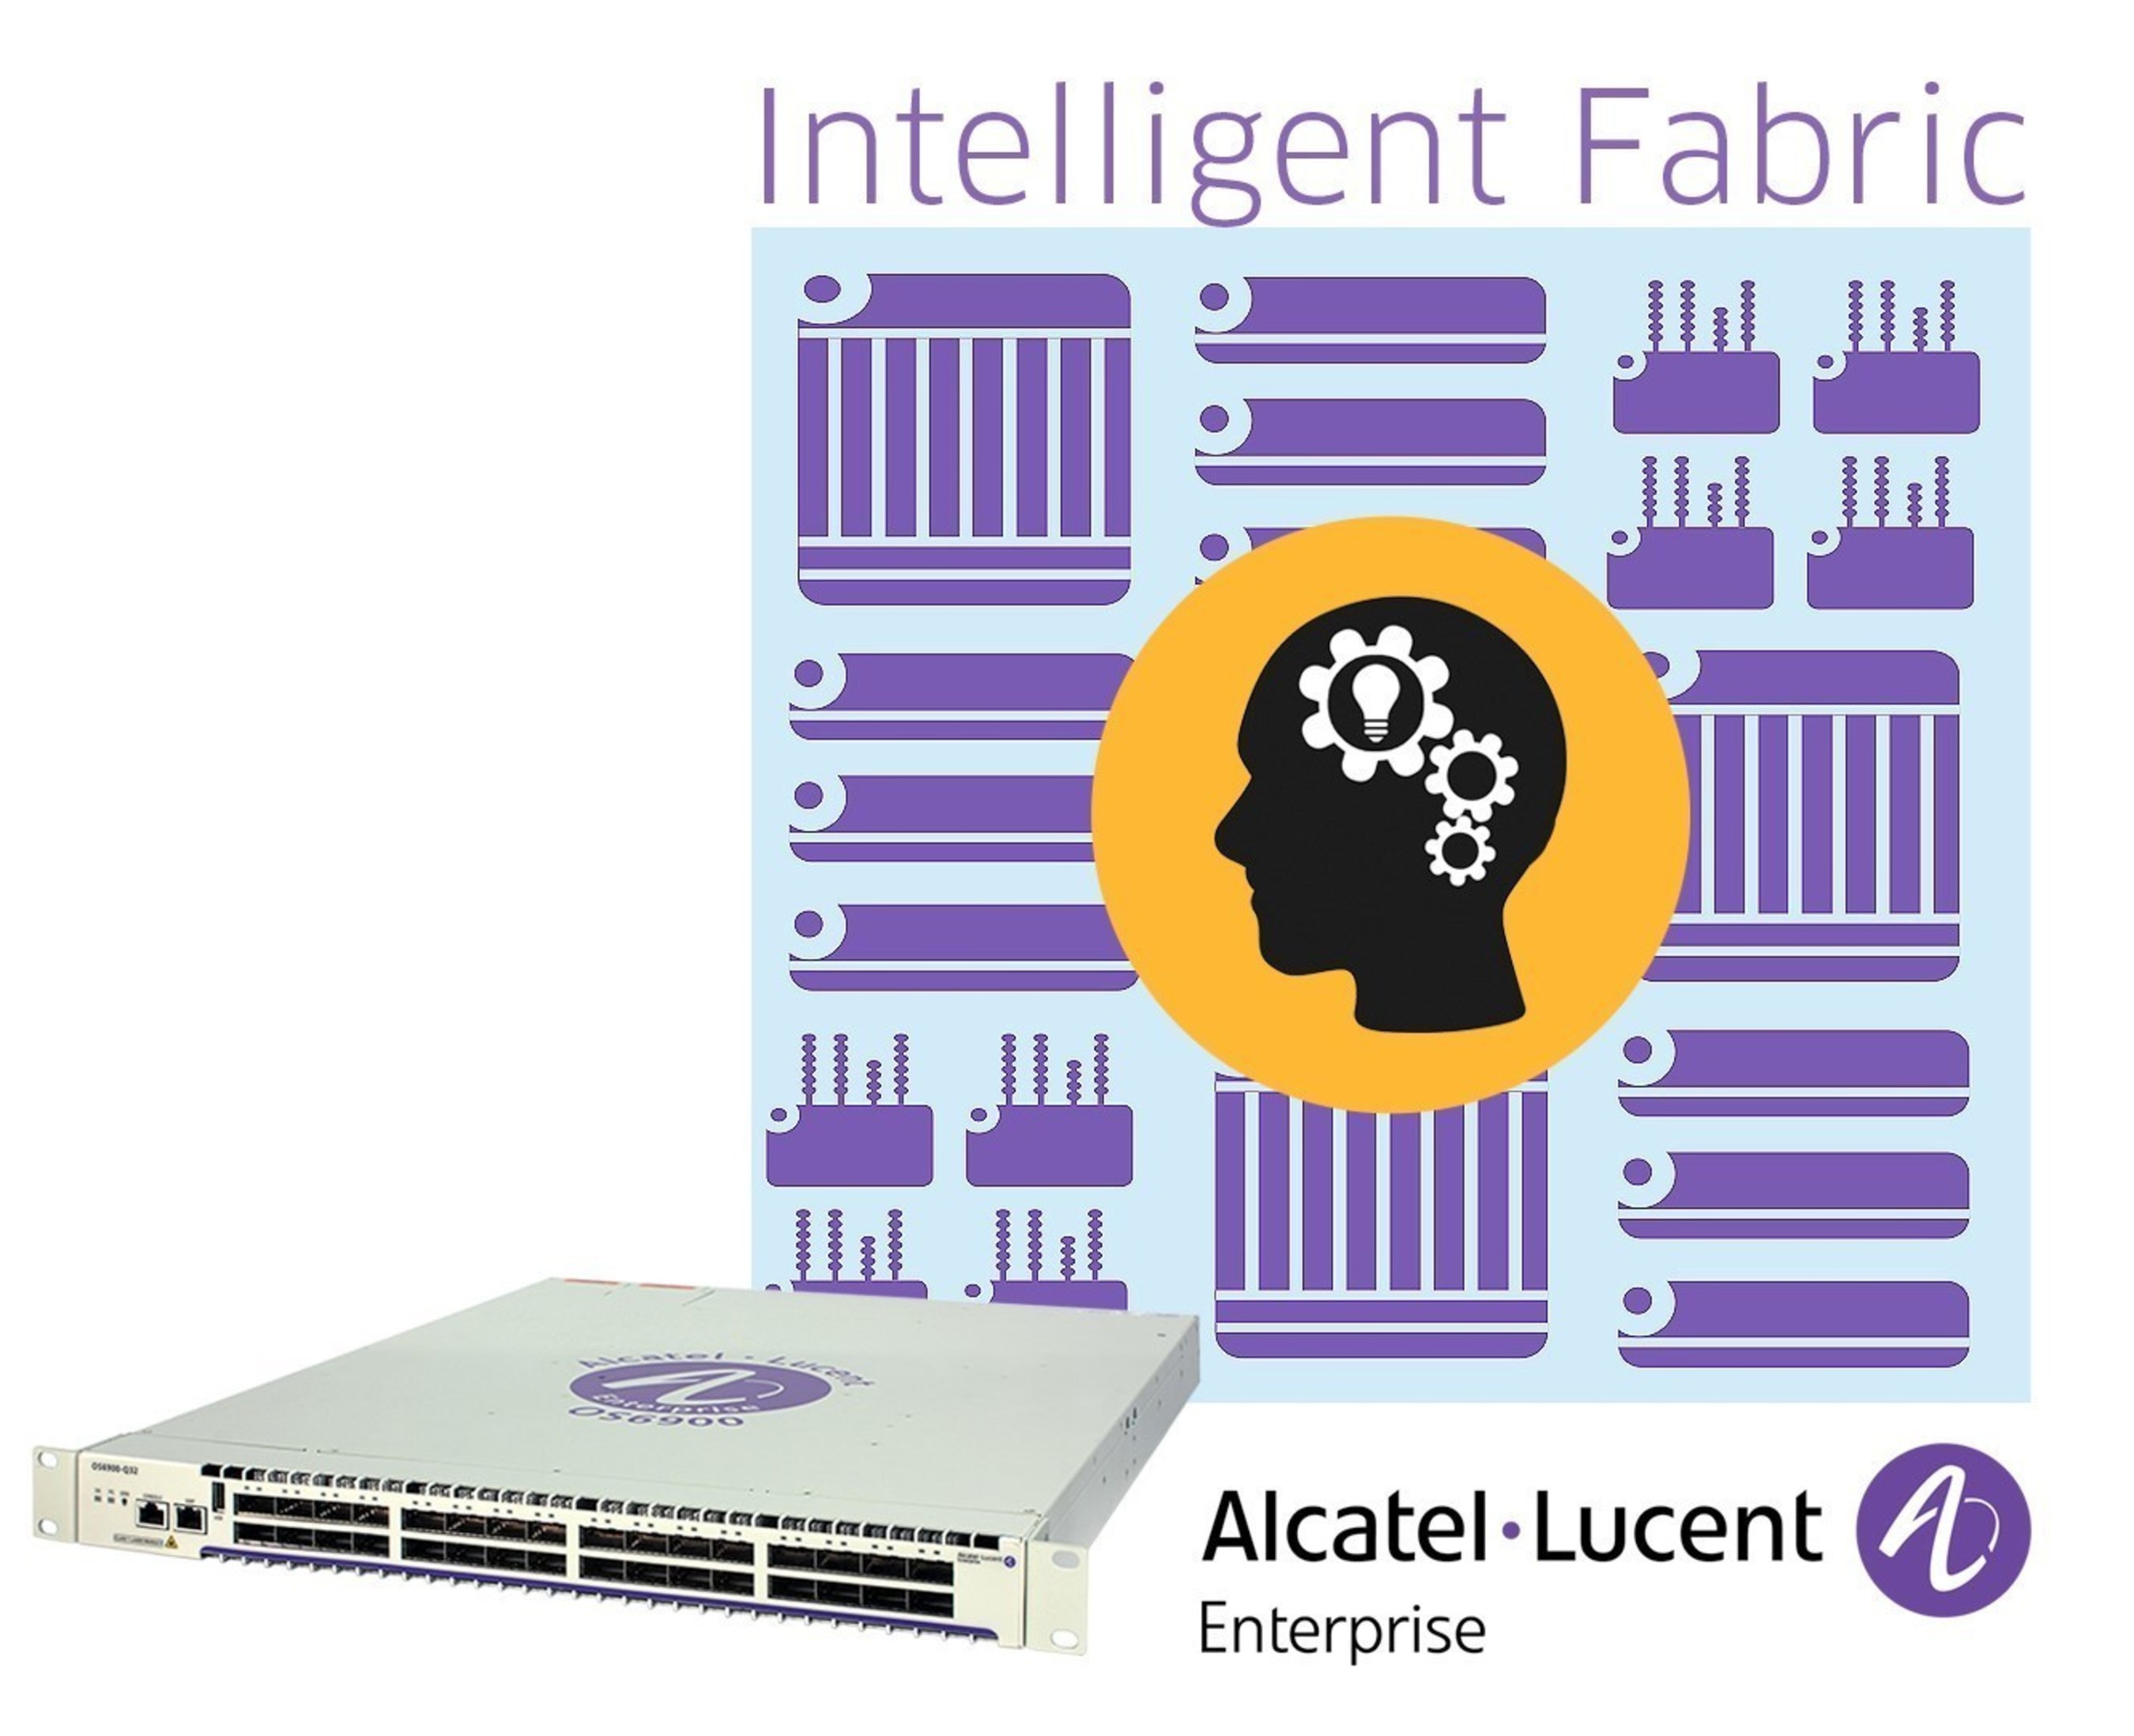 New Alcatel-Lucent Enterprise Intelligent Fabric technology available for all OmniSwitch products including the new OmniSwitch 6900-Q32.